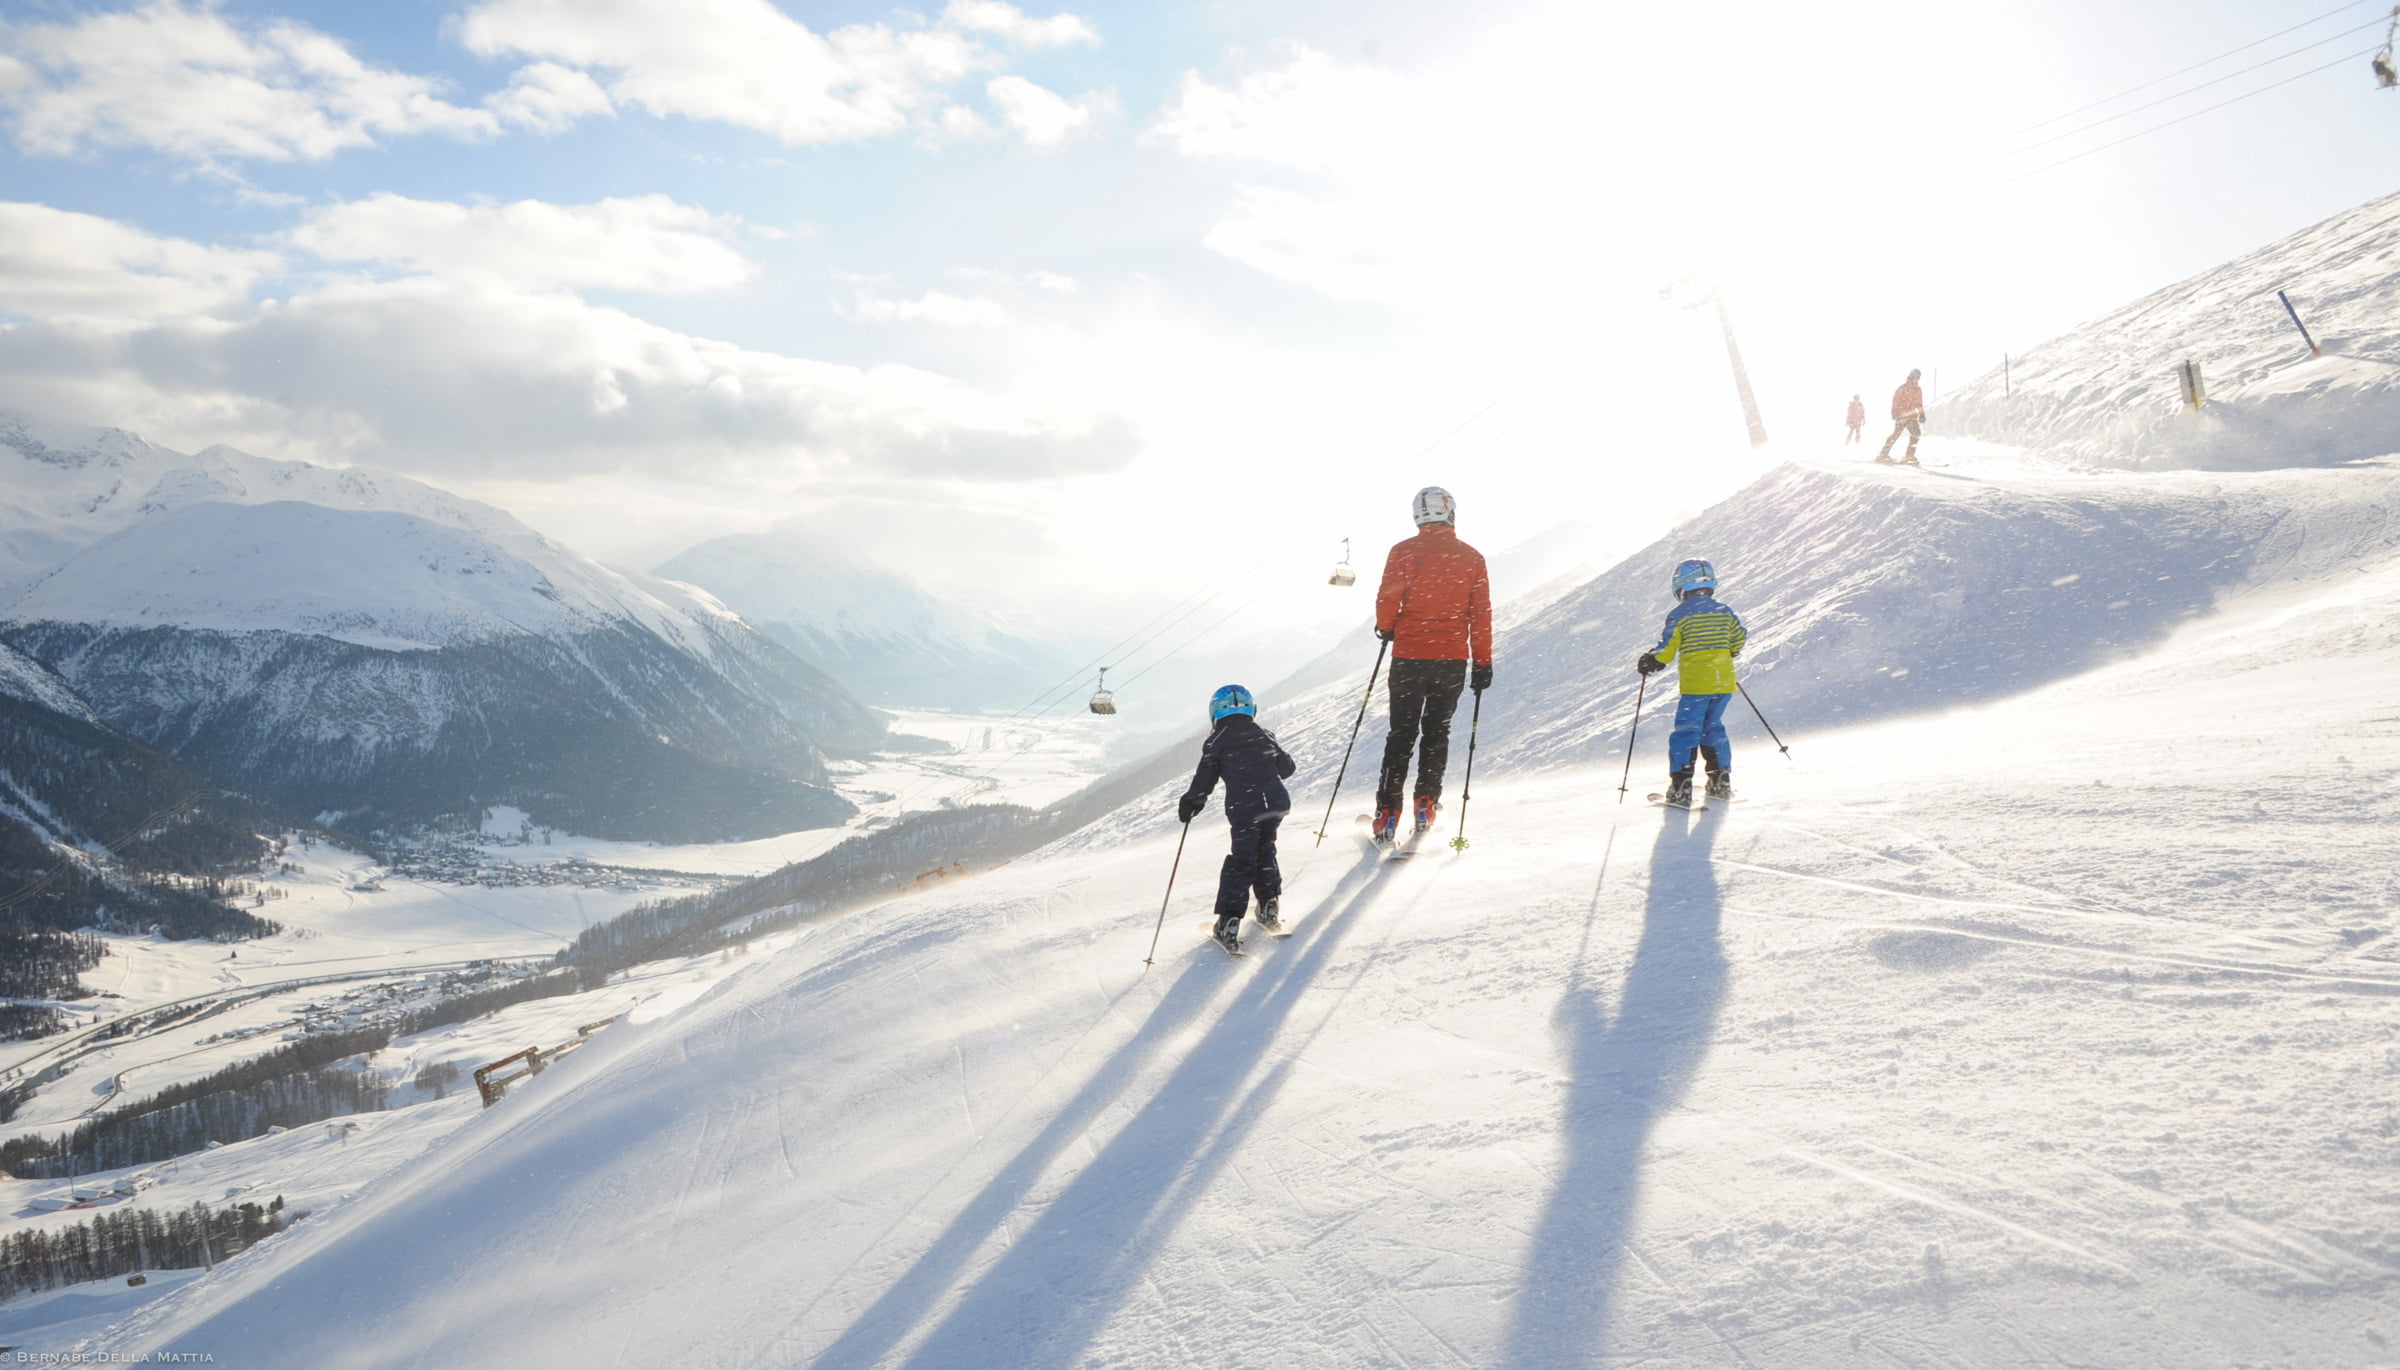 Pistes for relaxed winter days 